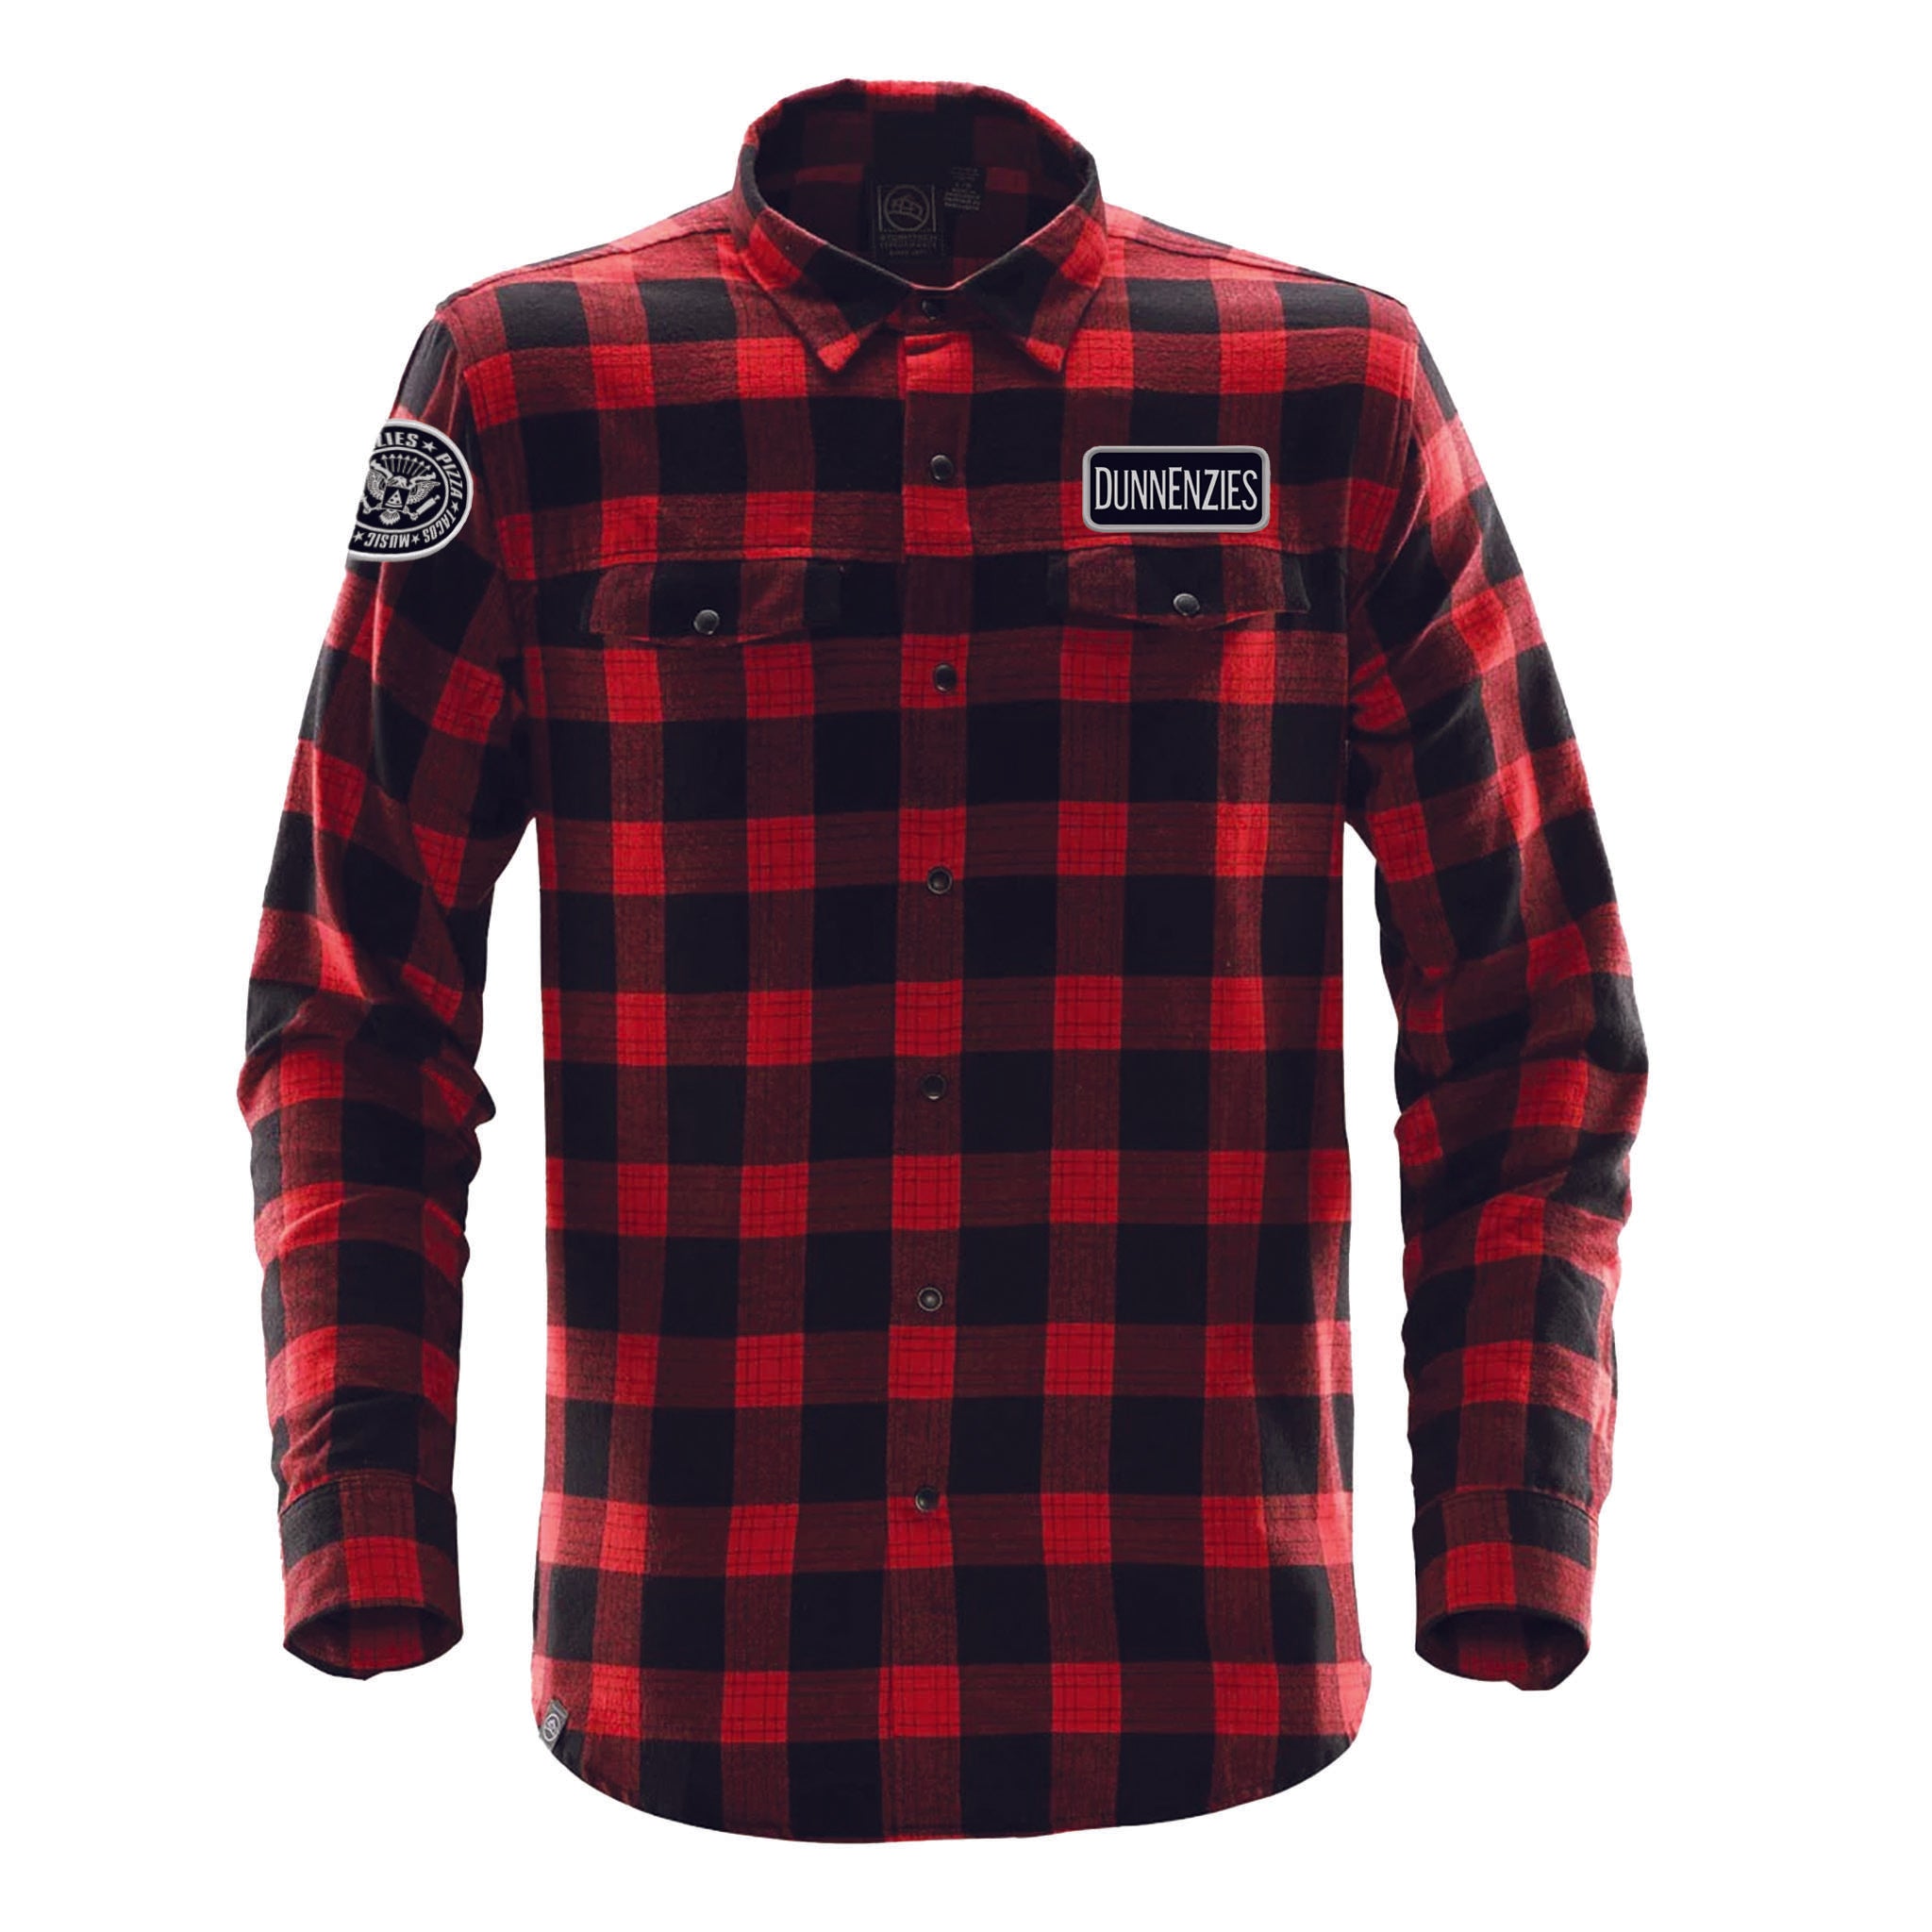 Dunnenzies Stormtech Snapfront Long Sleeve - Adult Unisex Sizing XS-4XL - Plaid Red